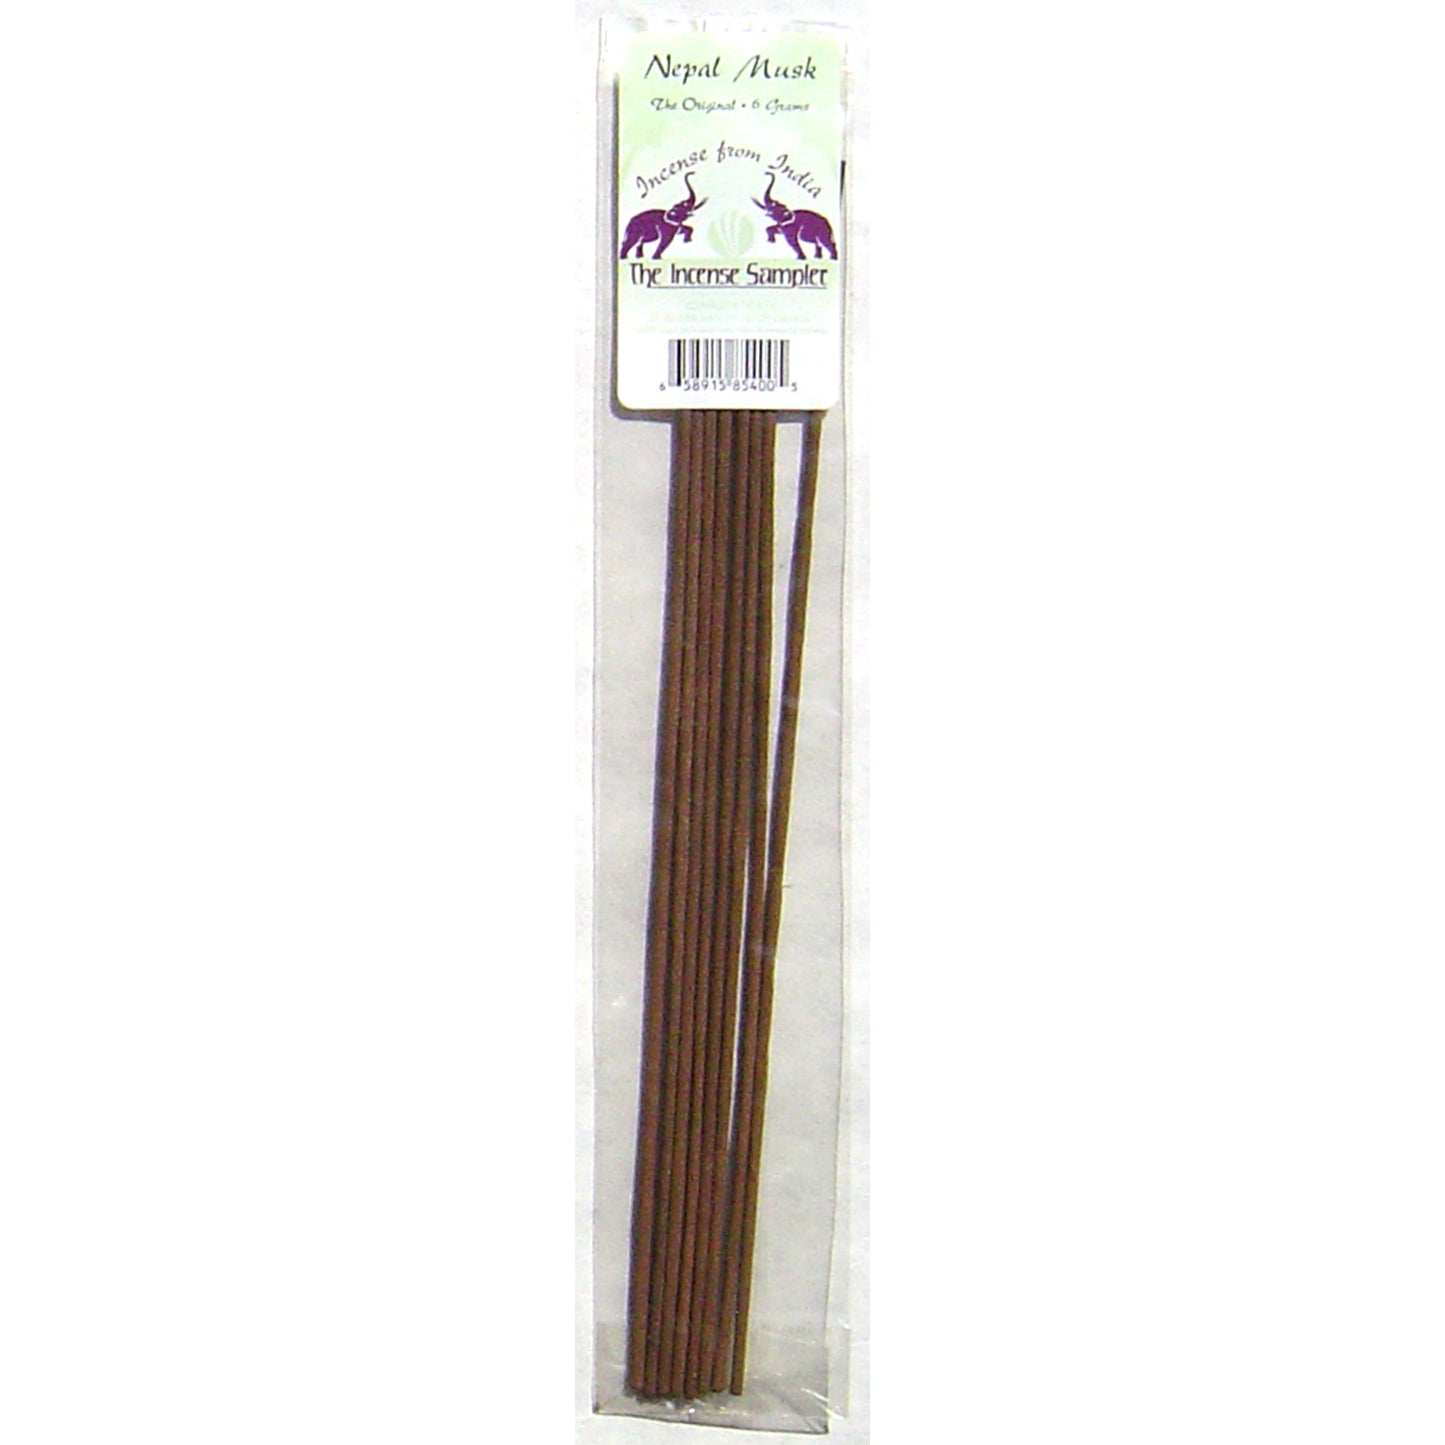 Incense From India - Nepal Musk